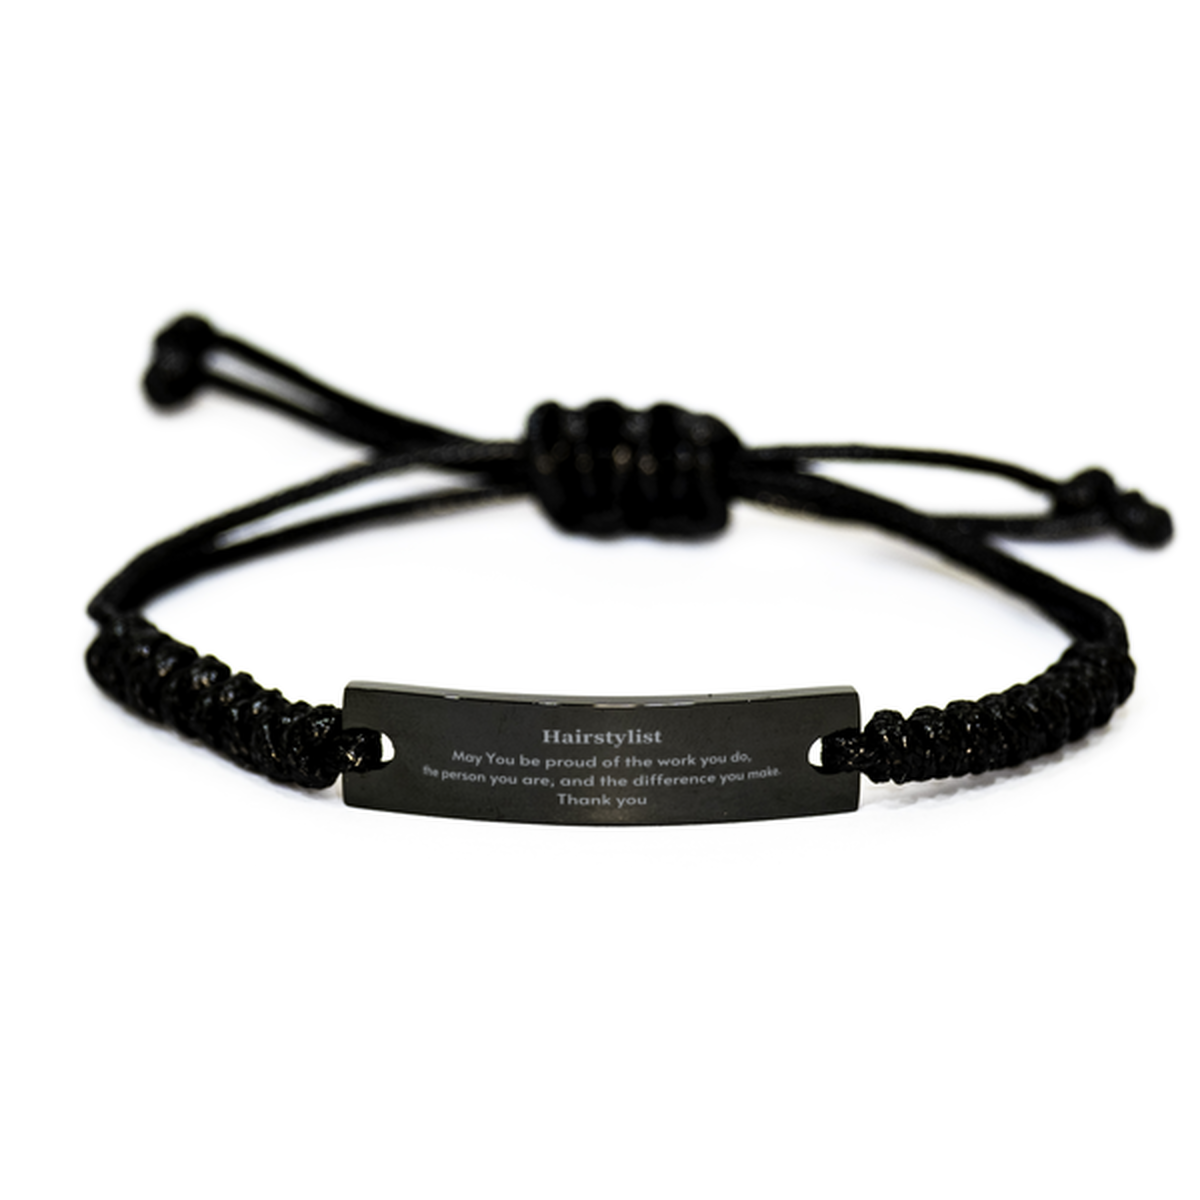 Heartwarming Black Rope Bracelet Retirement Coworkers Gifts for Hairstylist, Hairstylist May You be proud of the work you do, the person you are Gifts for Boss Men Women Friends